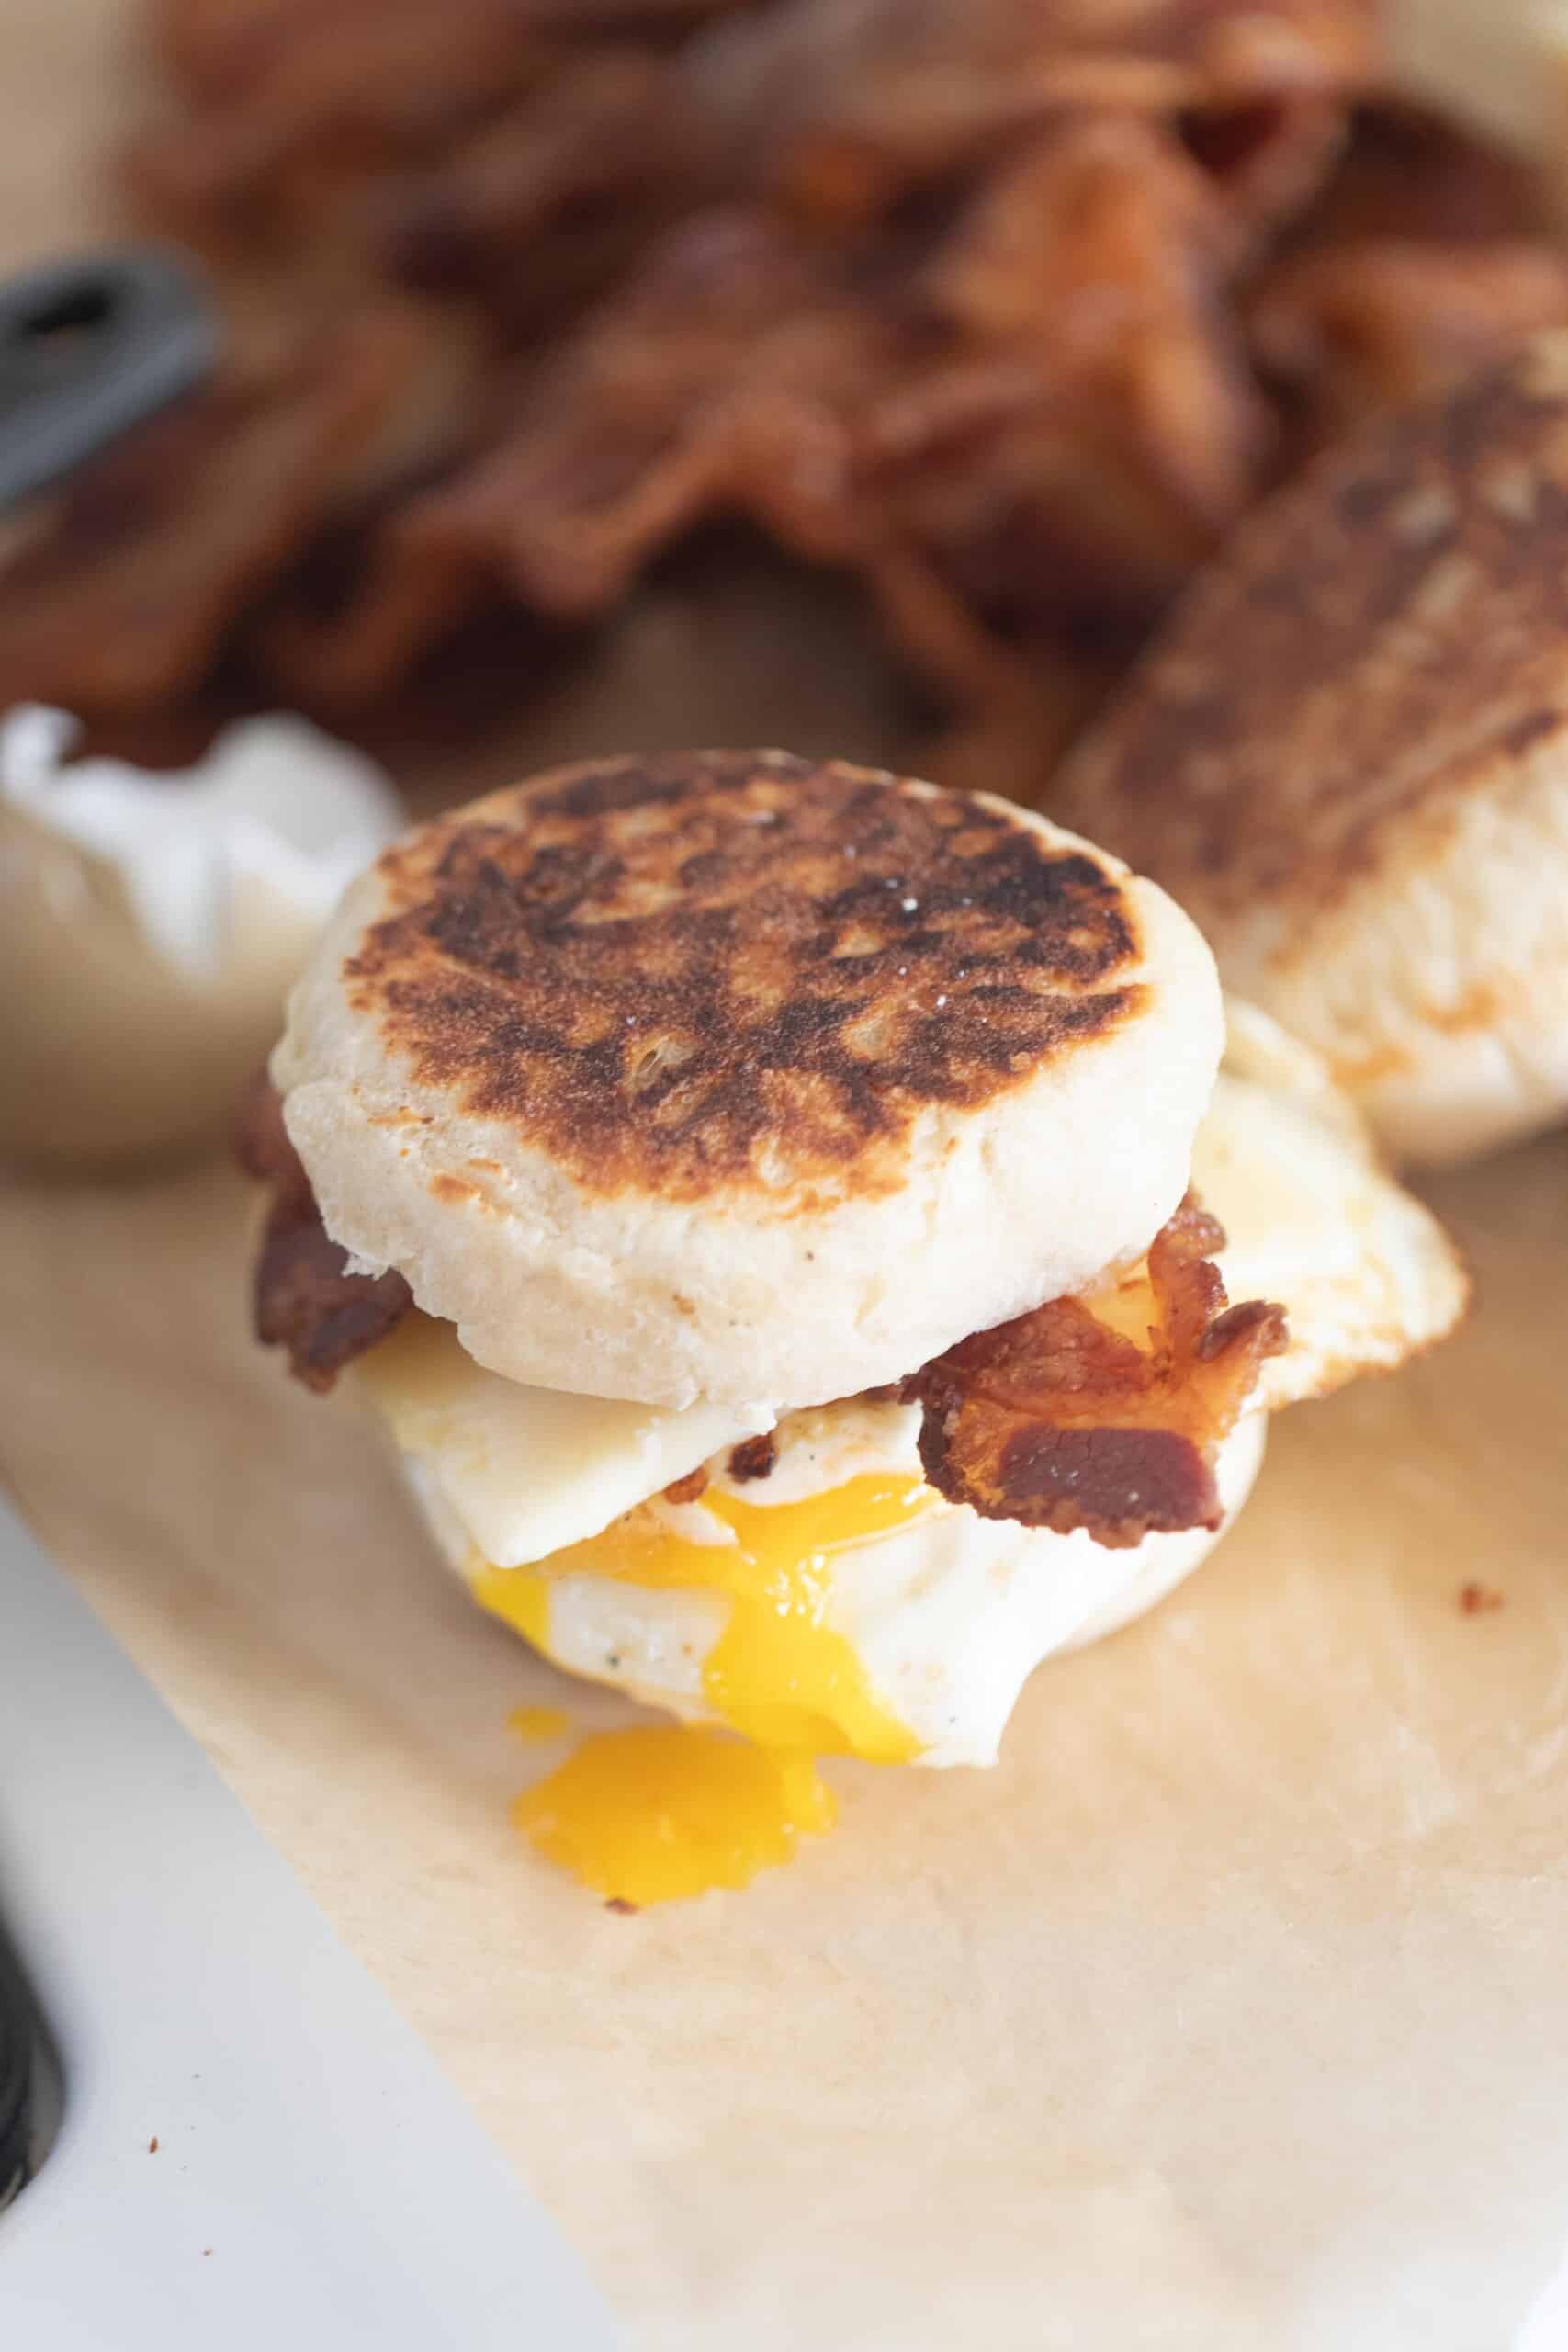 sourdough breakfast sandwich made with English muffins, crispy bacon, sharp cheddar cheese, and an over easy egg with the yolk that has broken and running down the sandwich. The sandwich sits on parchment paper with more ingredients in the background